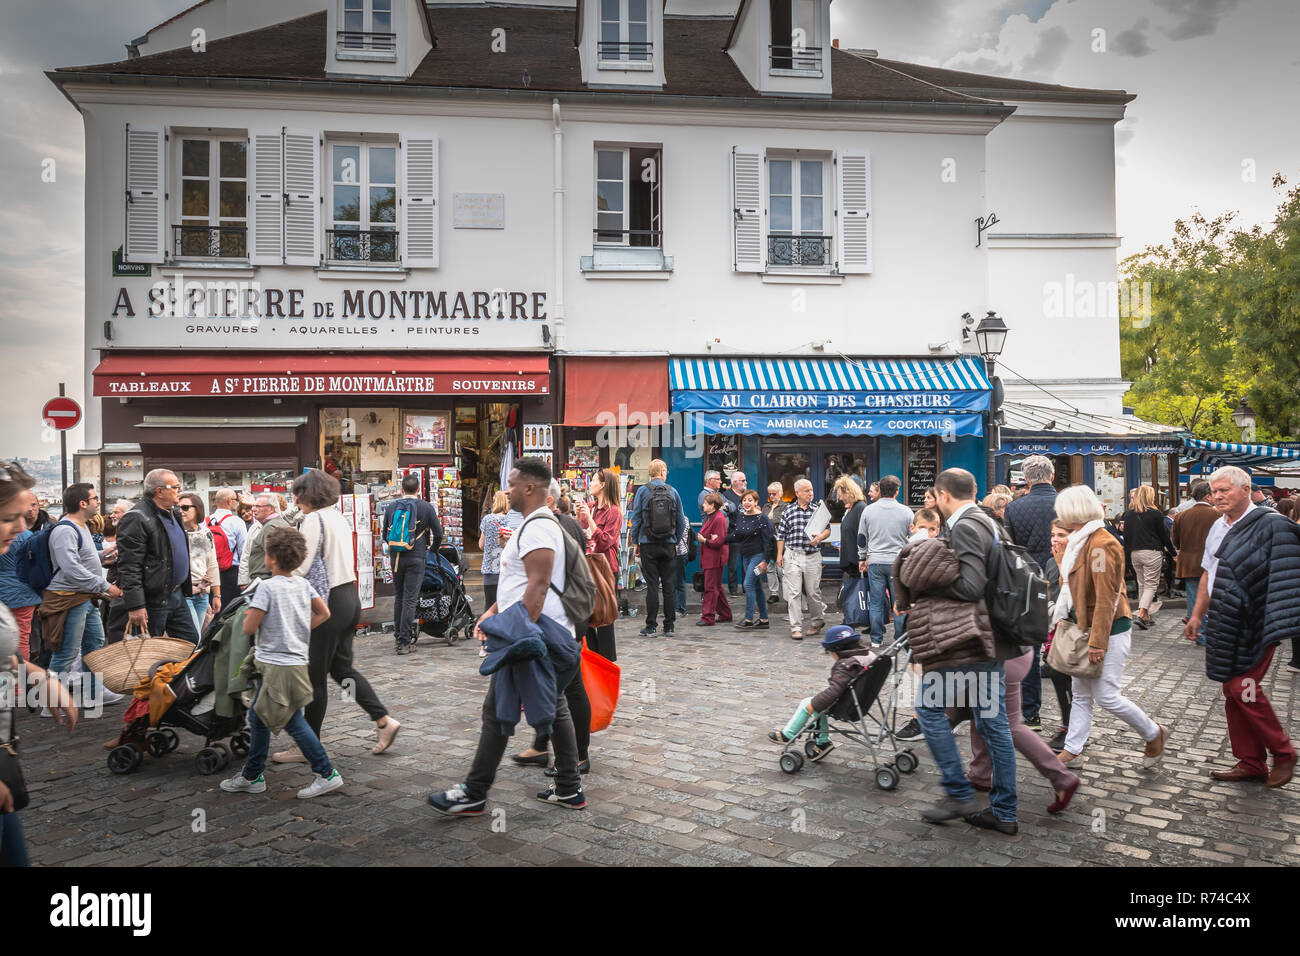 Paris, France - October 6, 2018: street atmosphere on the famous Place du Tertre in Montmartre where artists exhibit their work for curious passers-by Stock Photo